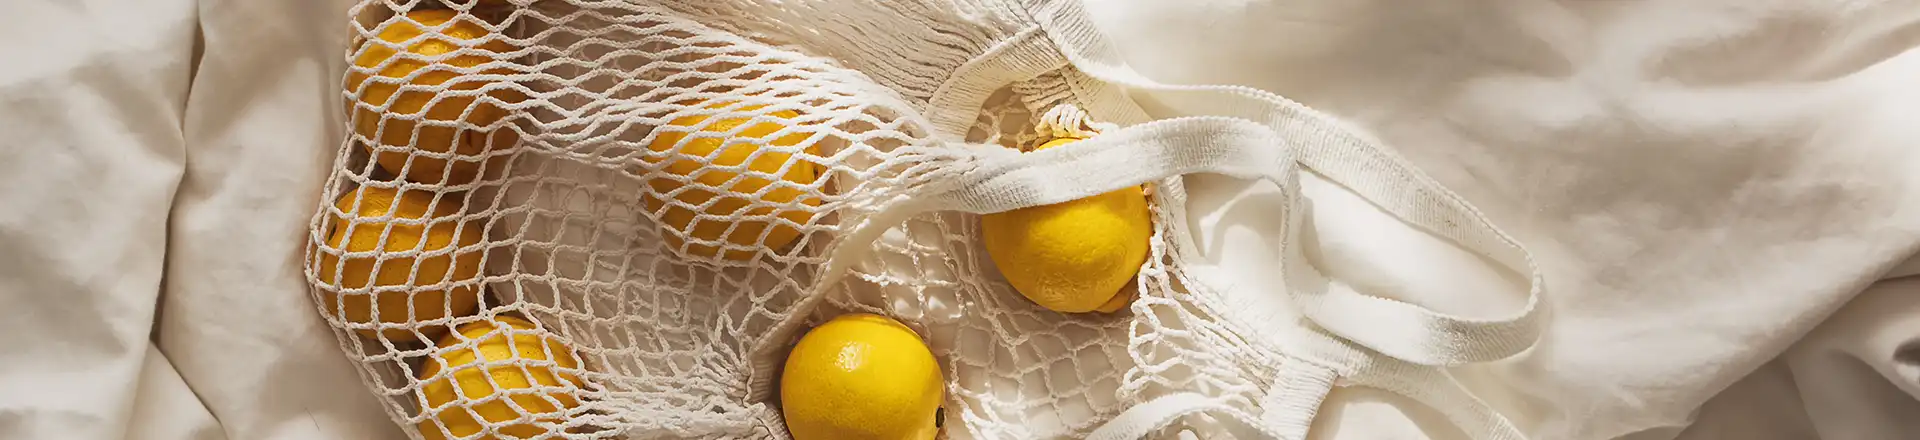 netted reusable bag with lemons in it